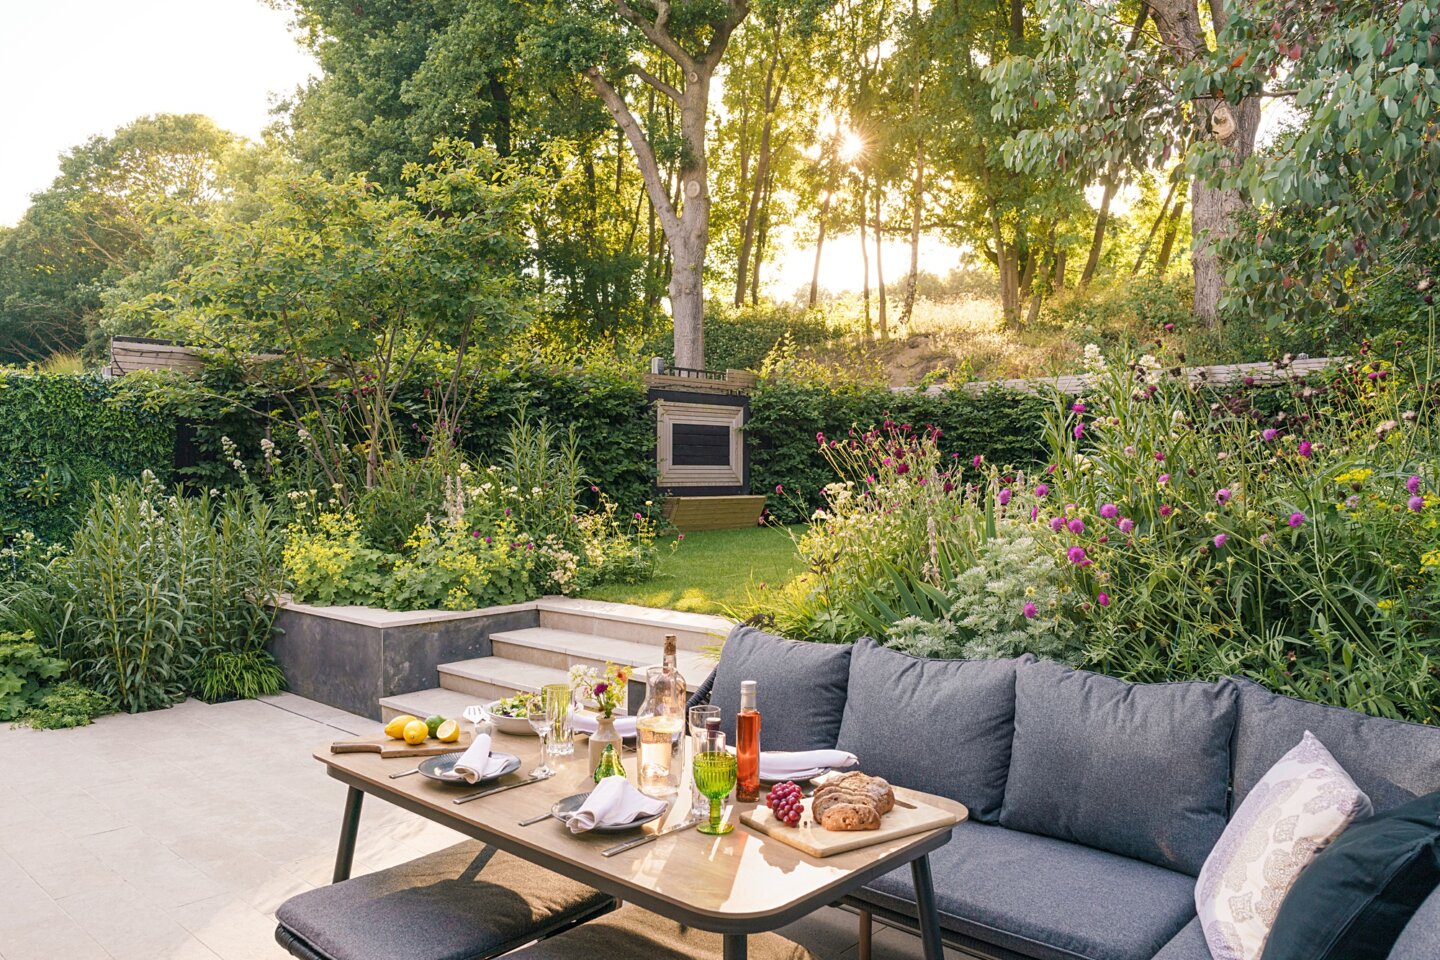 Example of compact family garden with raised lawn, seating and table area ready for dining